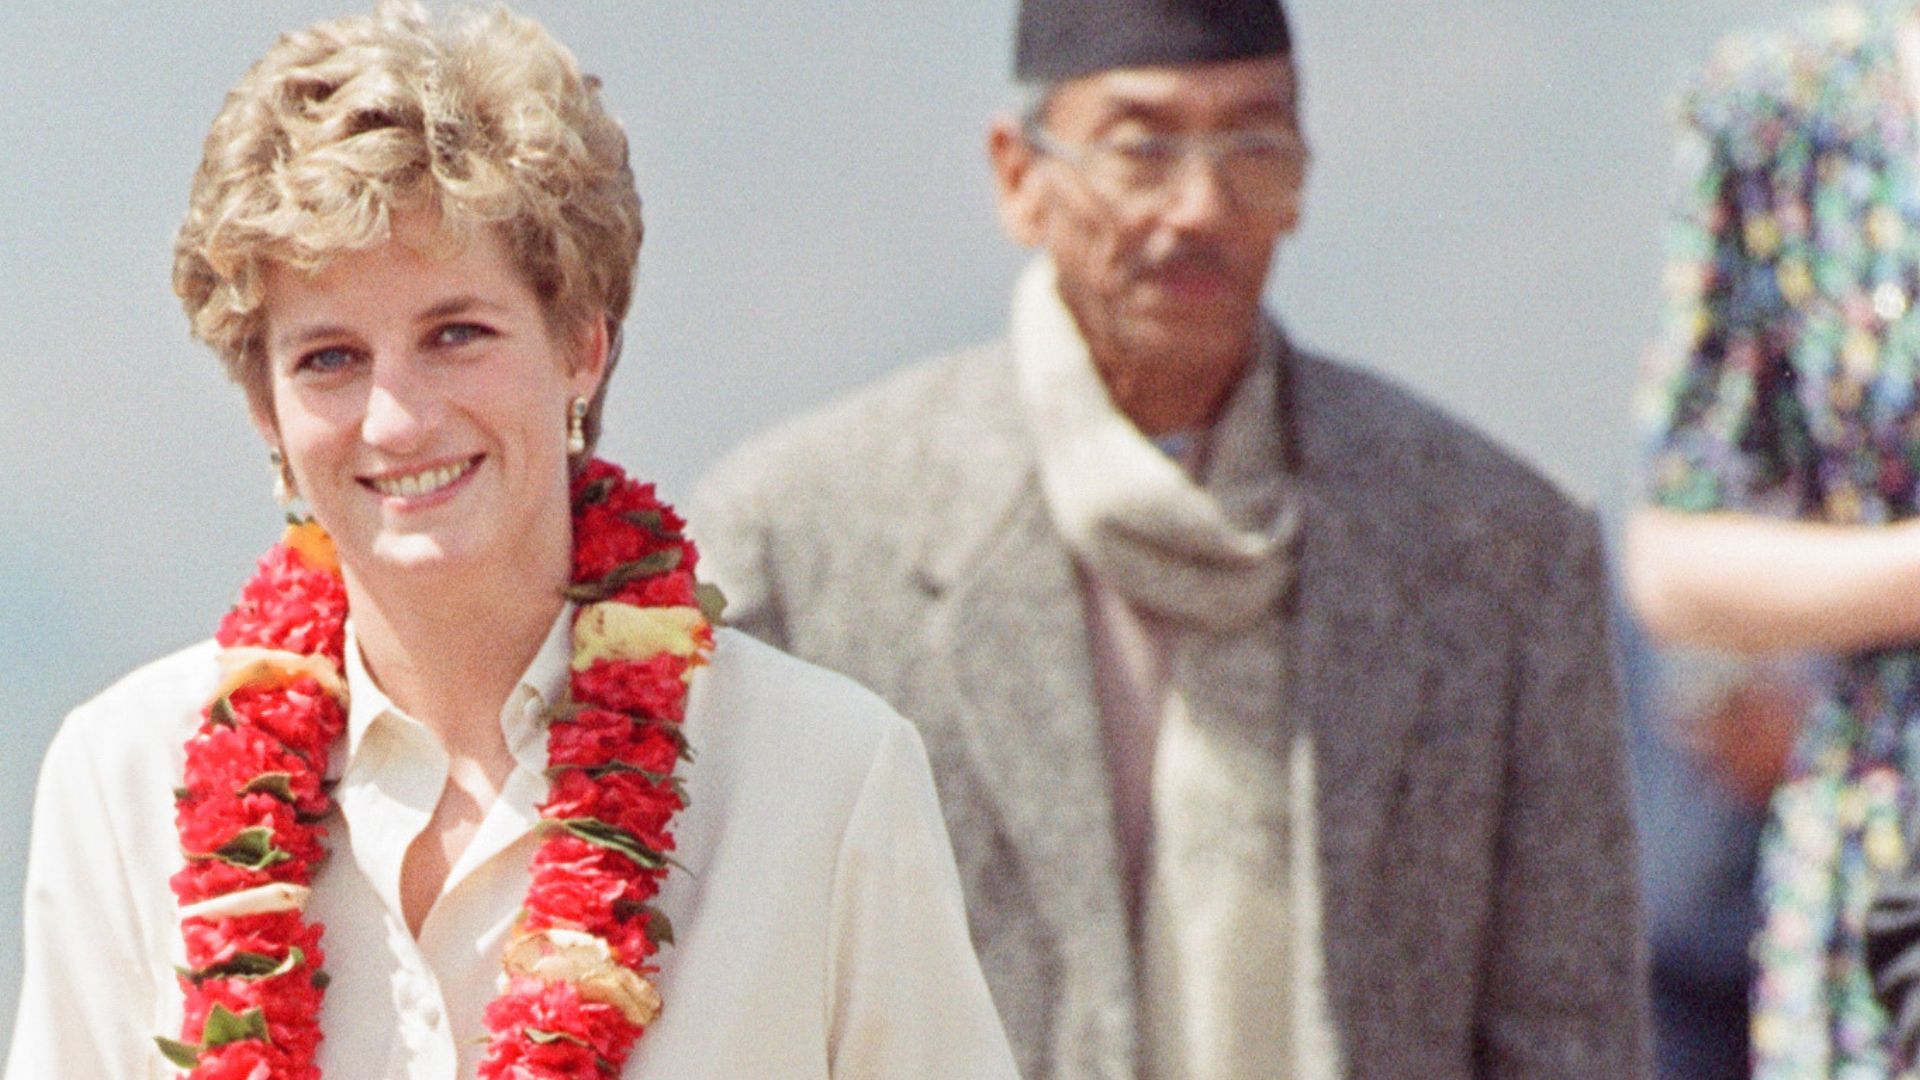 <p>                     The Princess visited Nepal between the 2nd and the 6th of March 1993 on her first official solo visit abroad since her separation from Prince Charles. Staying at the British Embassy rather than the Palace with the Nepalese Royal Family the visit was part of a partnership with the British Red Cross Youth and the Leprosy Mission. While in Nepal Princess Diana held leprosy patients' hands and sat on their beds, something the British media at the time were advising against. When talking to Nepal's minister-in-waiting, Ram Hari Joshi, before boarding her flight home talked about how she had thoroughly enjoyed the trip.                   </p>